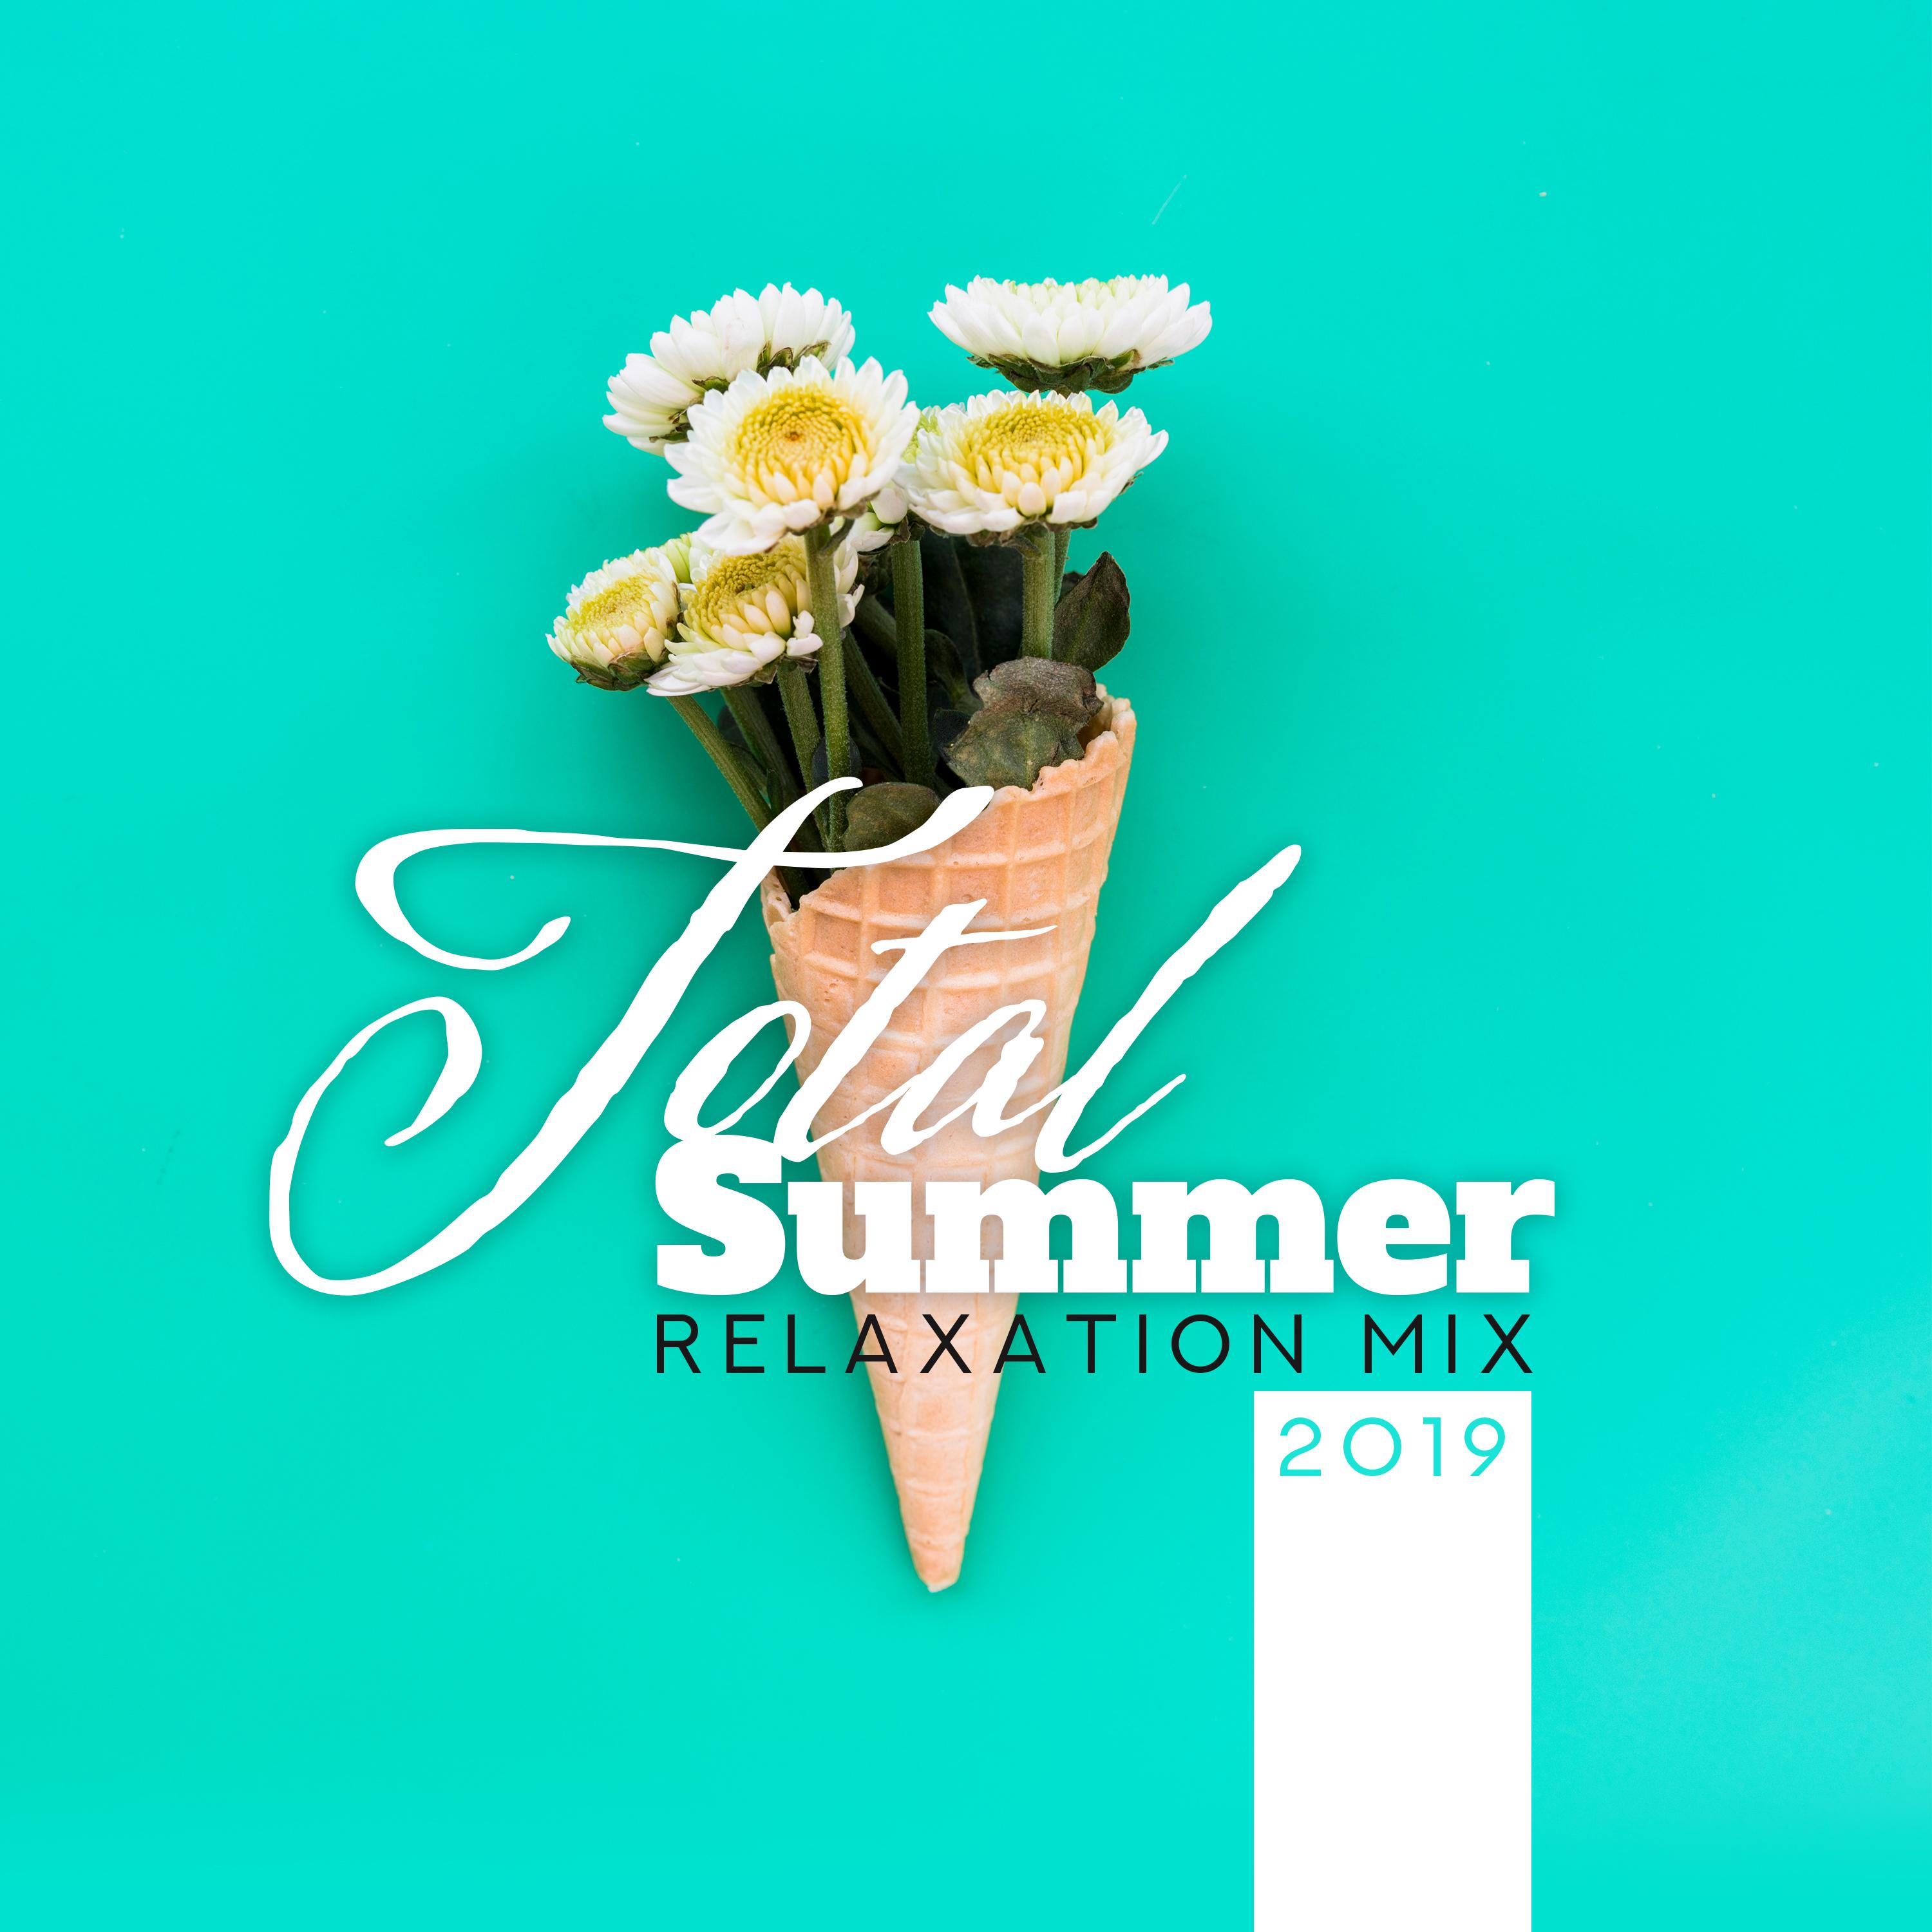 Total Summer Relaxation Mix 2019